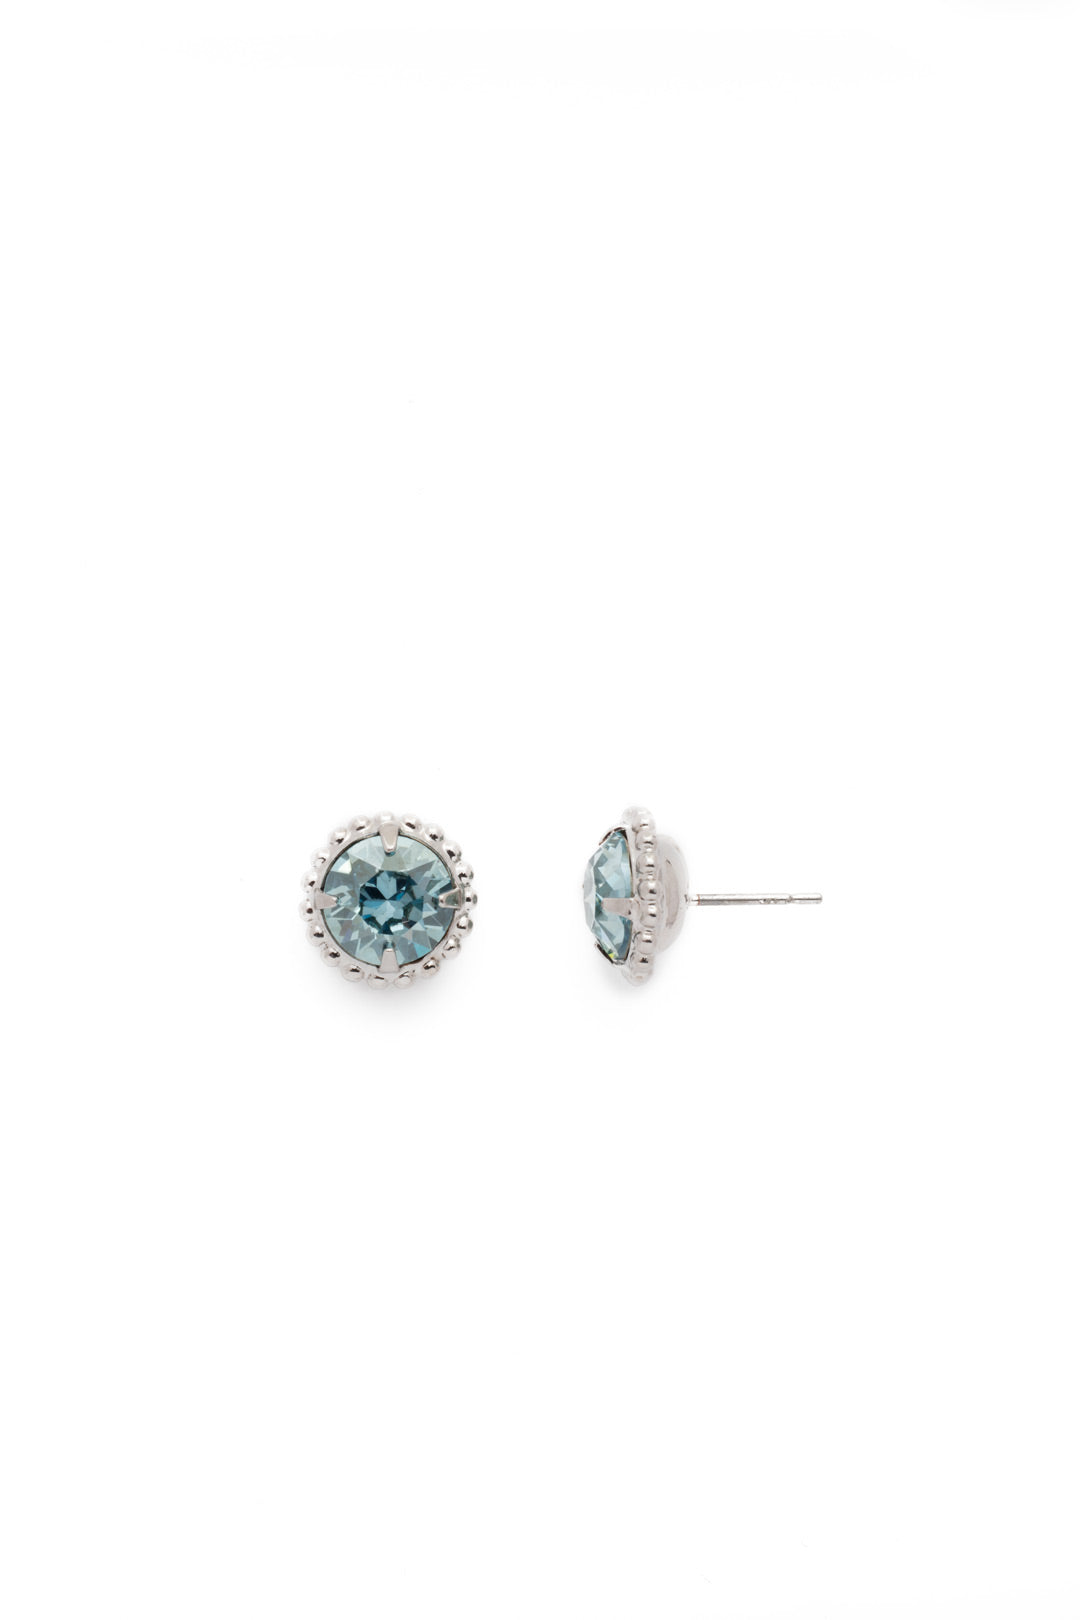 Simplicity Stud Earrings - EBY38RHLAQ - <p>A timeless classic, the Simplicity Stud Earrings feature round cut crystals in a variety of colors; accented with a halo of metal beaded detail. Need help picking a stud? <a href="https://www.sorrelli.com/blogs/sisterhood/round-stud-earrings-101-a-rundown-of-sizes-styles-and-sparkle">Check out our size guide!</a> From Sorrelli's Light Aqua collection in our Palladium Silver-tone finish.</p>